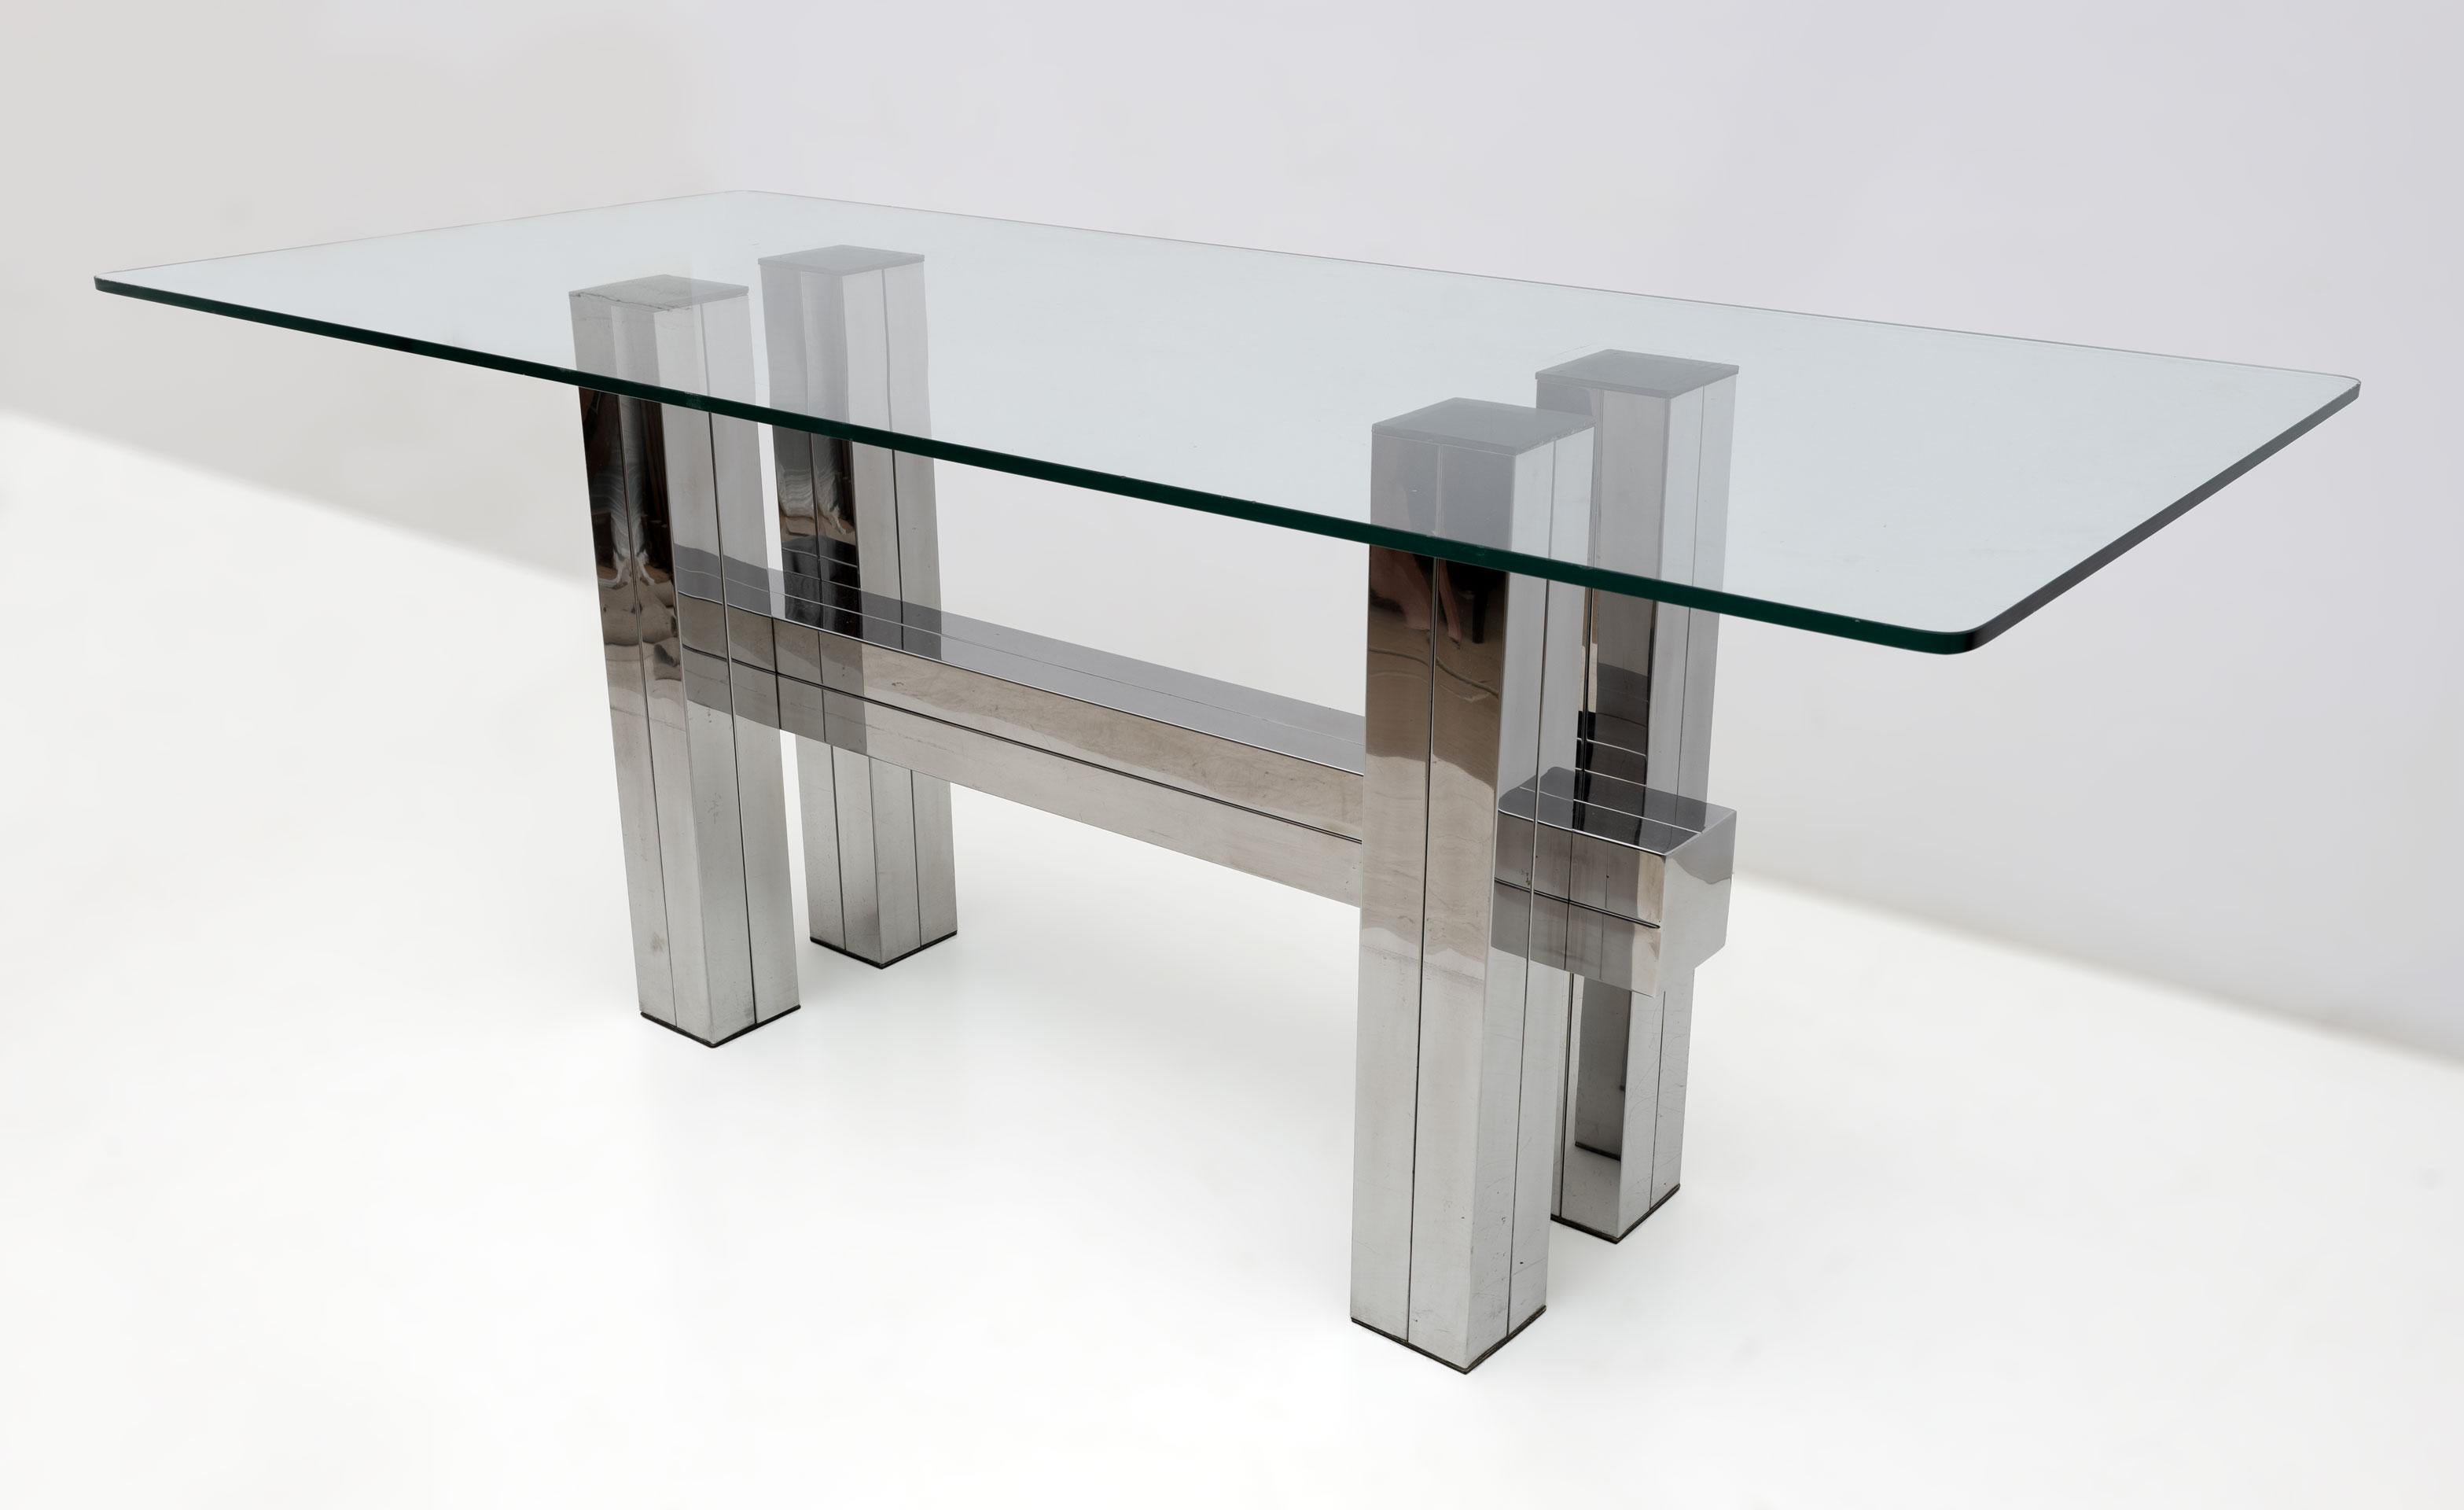 Late 20th Century Mid-century Modern Italian Steel and Glass Dining Table, 1980s For Sale